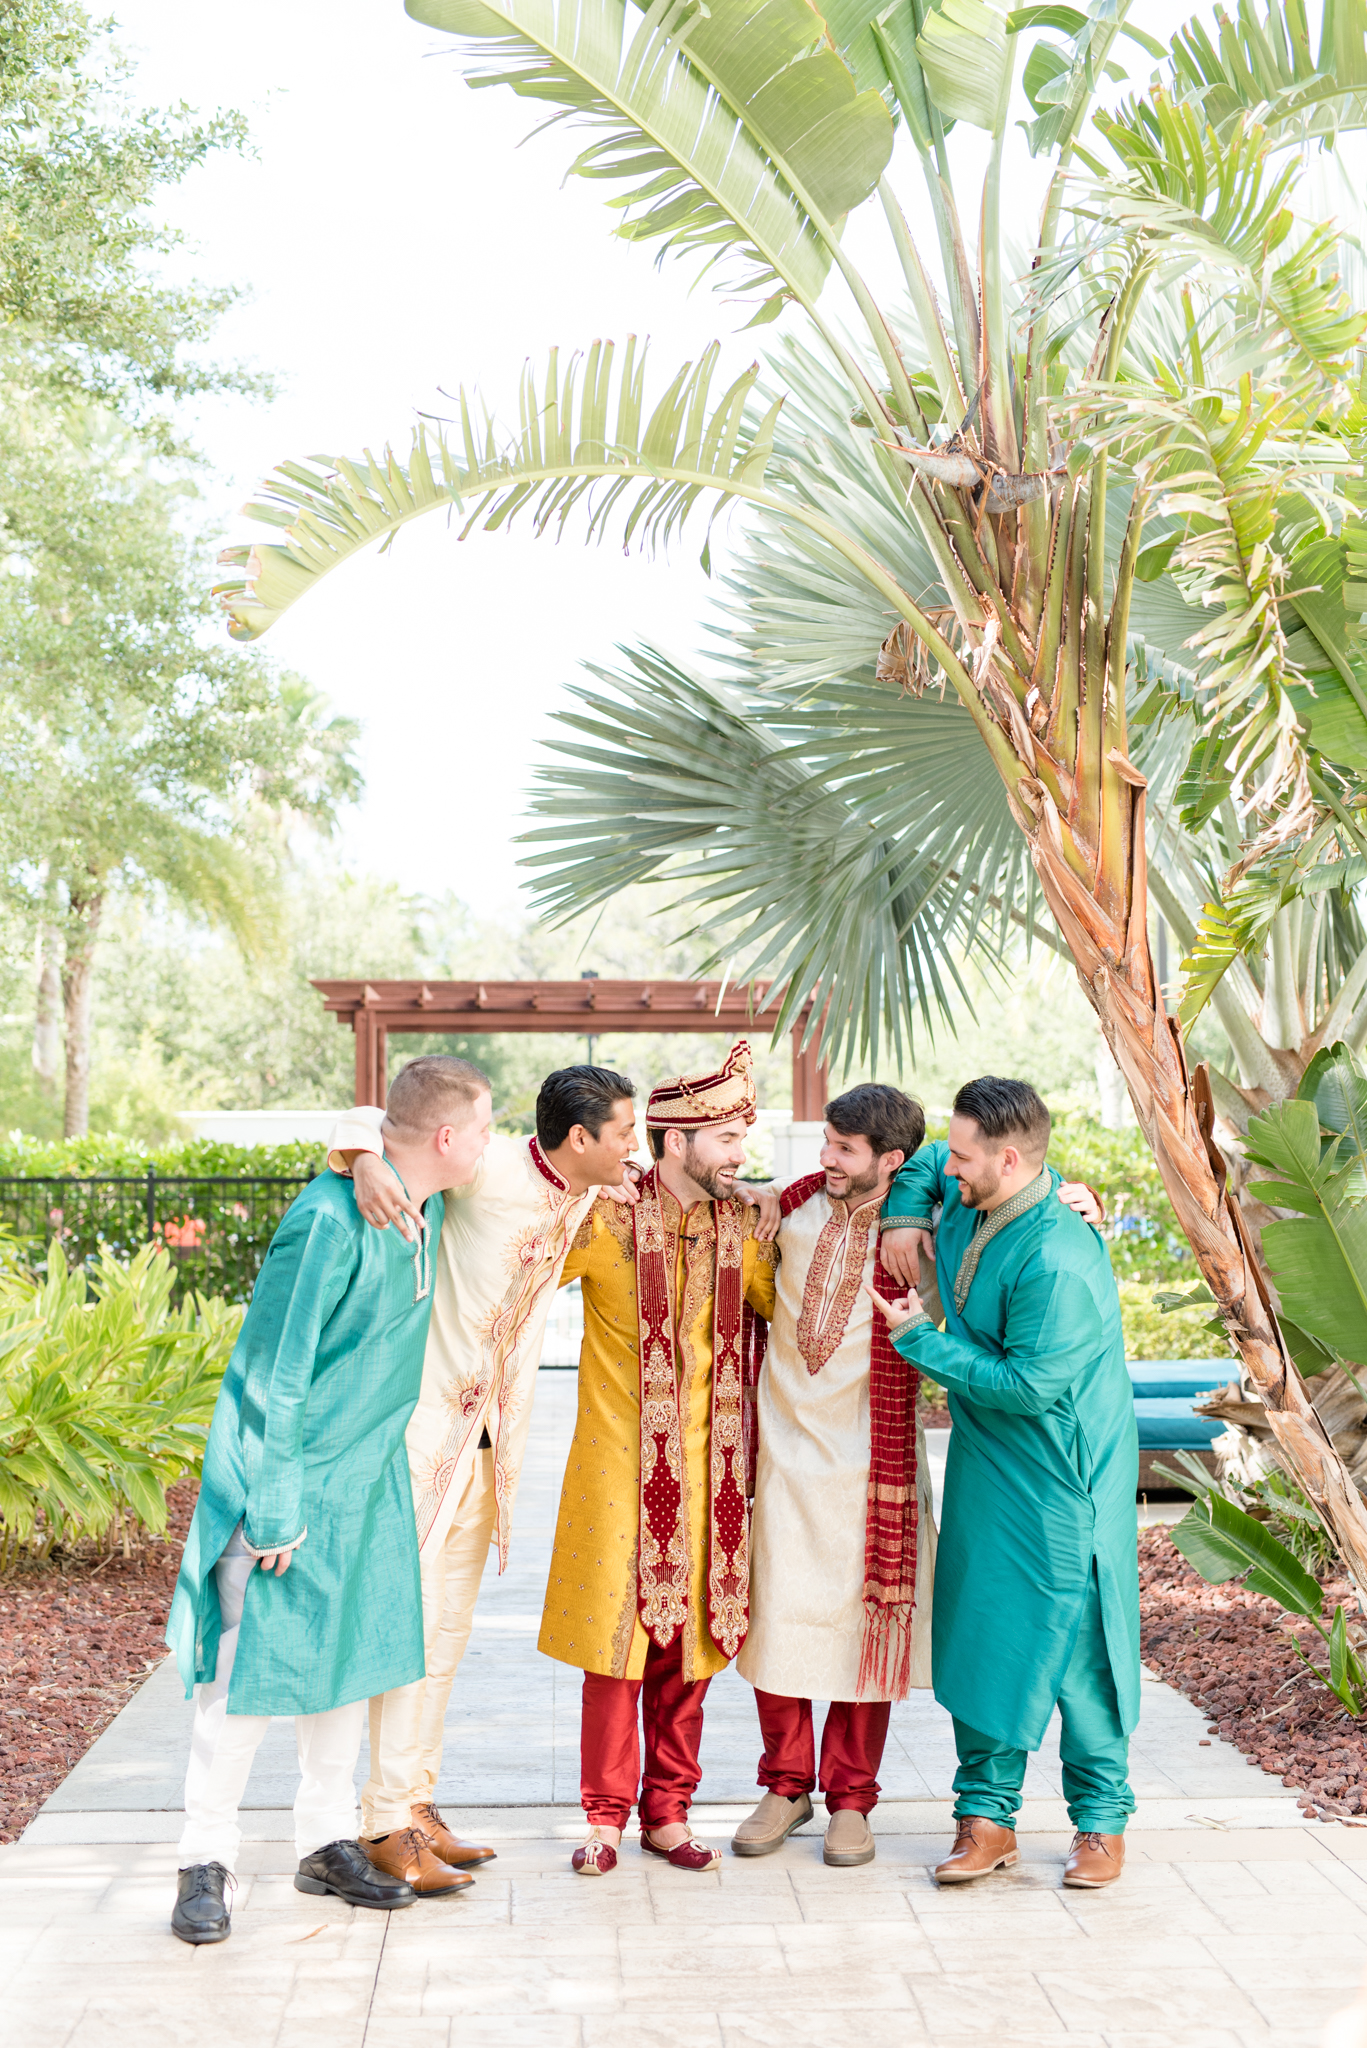 Groom and groomsmen laugh together.